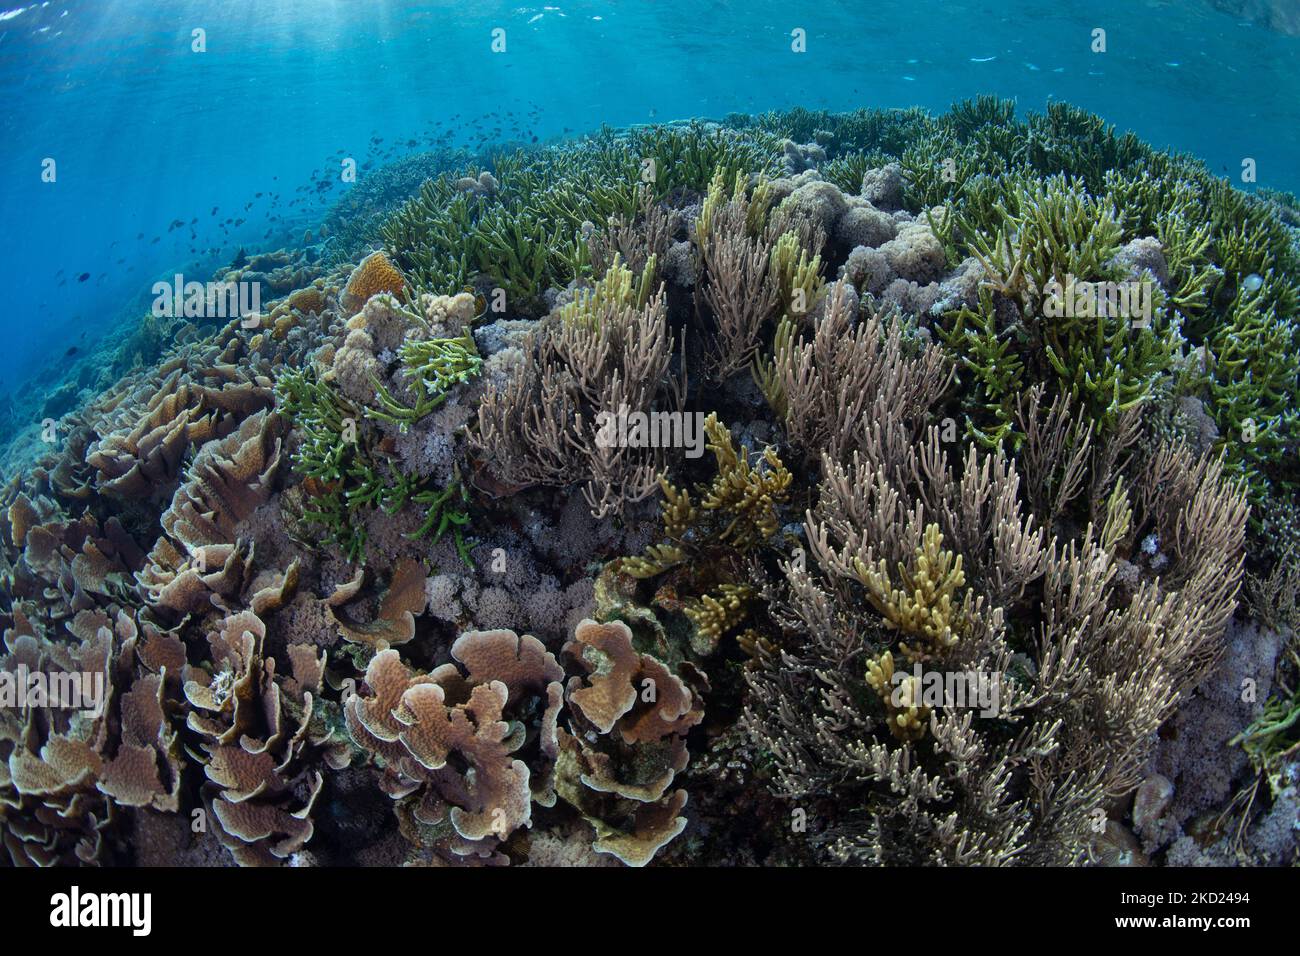 A diverse array of corals compete for space on a shallow, healthy reef near Komodo, Indonesia. This tropical area contains high marine biodiversity. Stock Photo